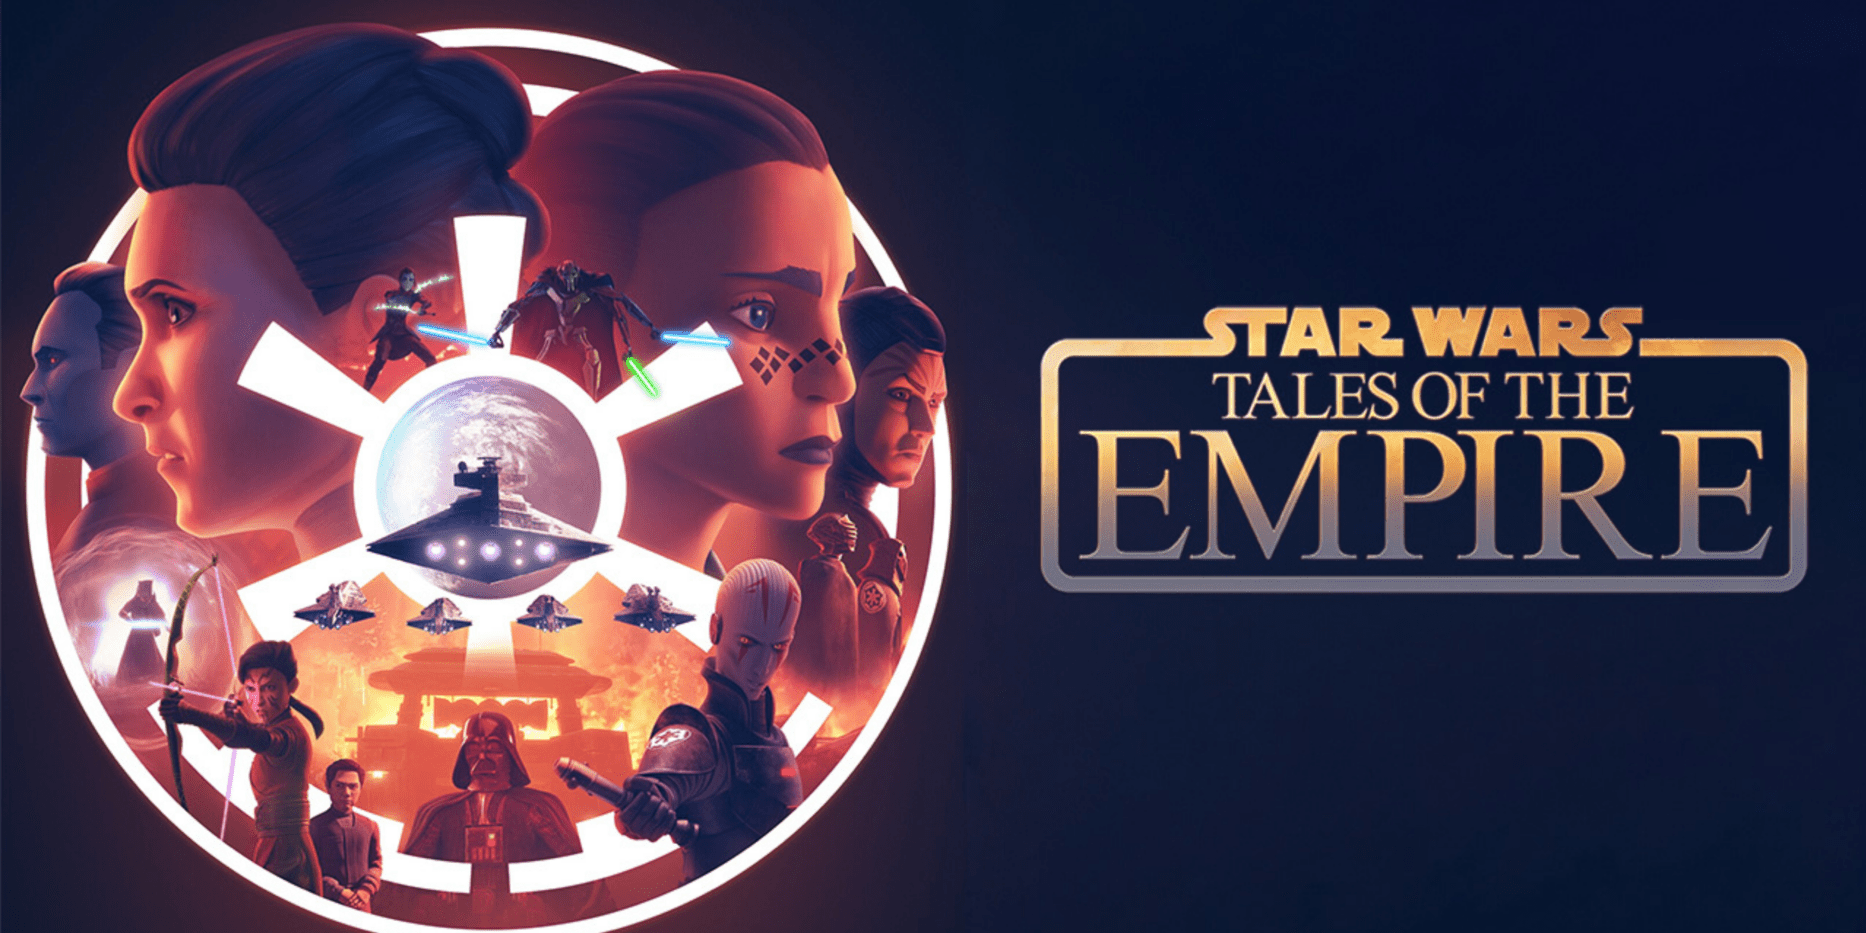 What We Know So Far From the ‘Star Wars: Tales of the Empire’ Trailer